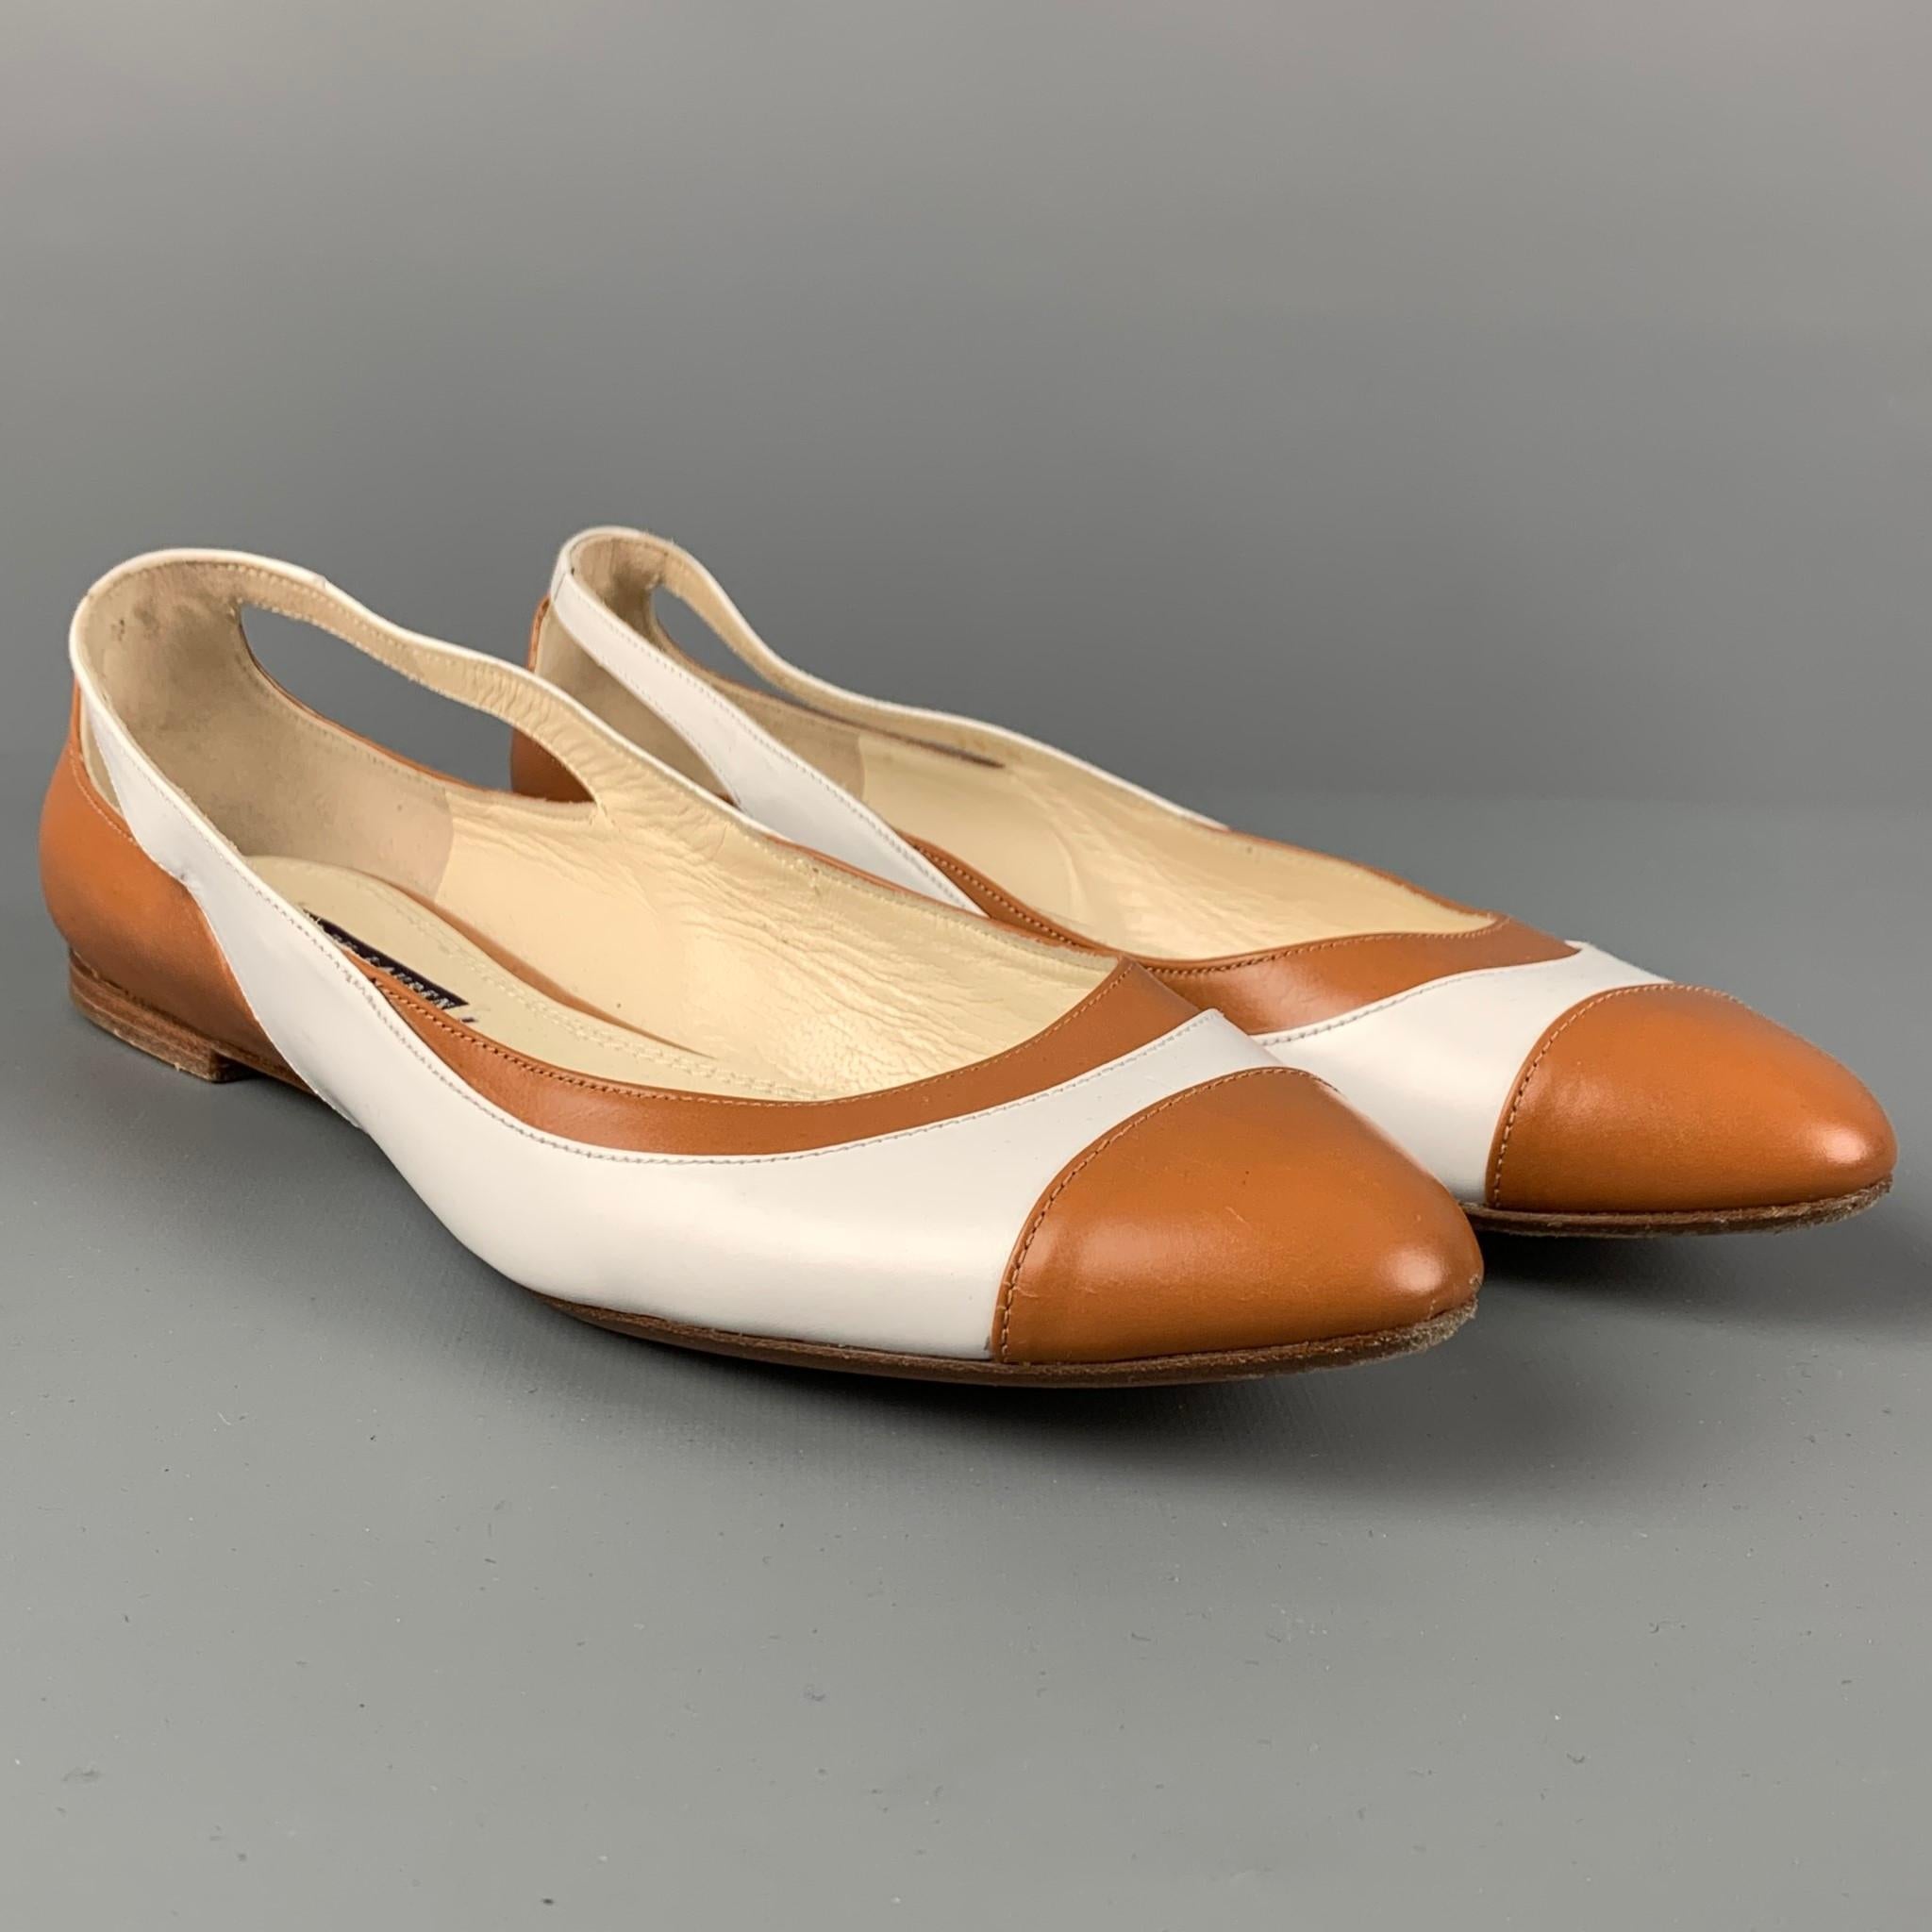 RALPH LAUREN COLLECTION flats comes in a tan & white leather featuring a cut-out design and a slip on style. Made in Spain. 

Very Good Pre-Owned Condition.
Marked: 38

Outsole: 10.25 in. x 3 in. 